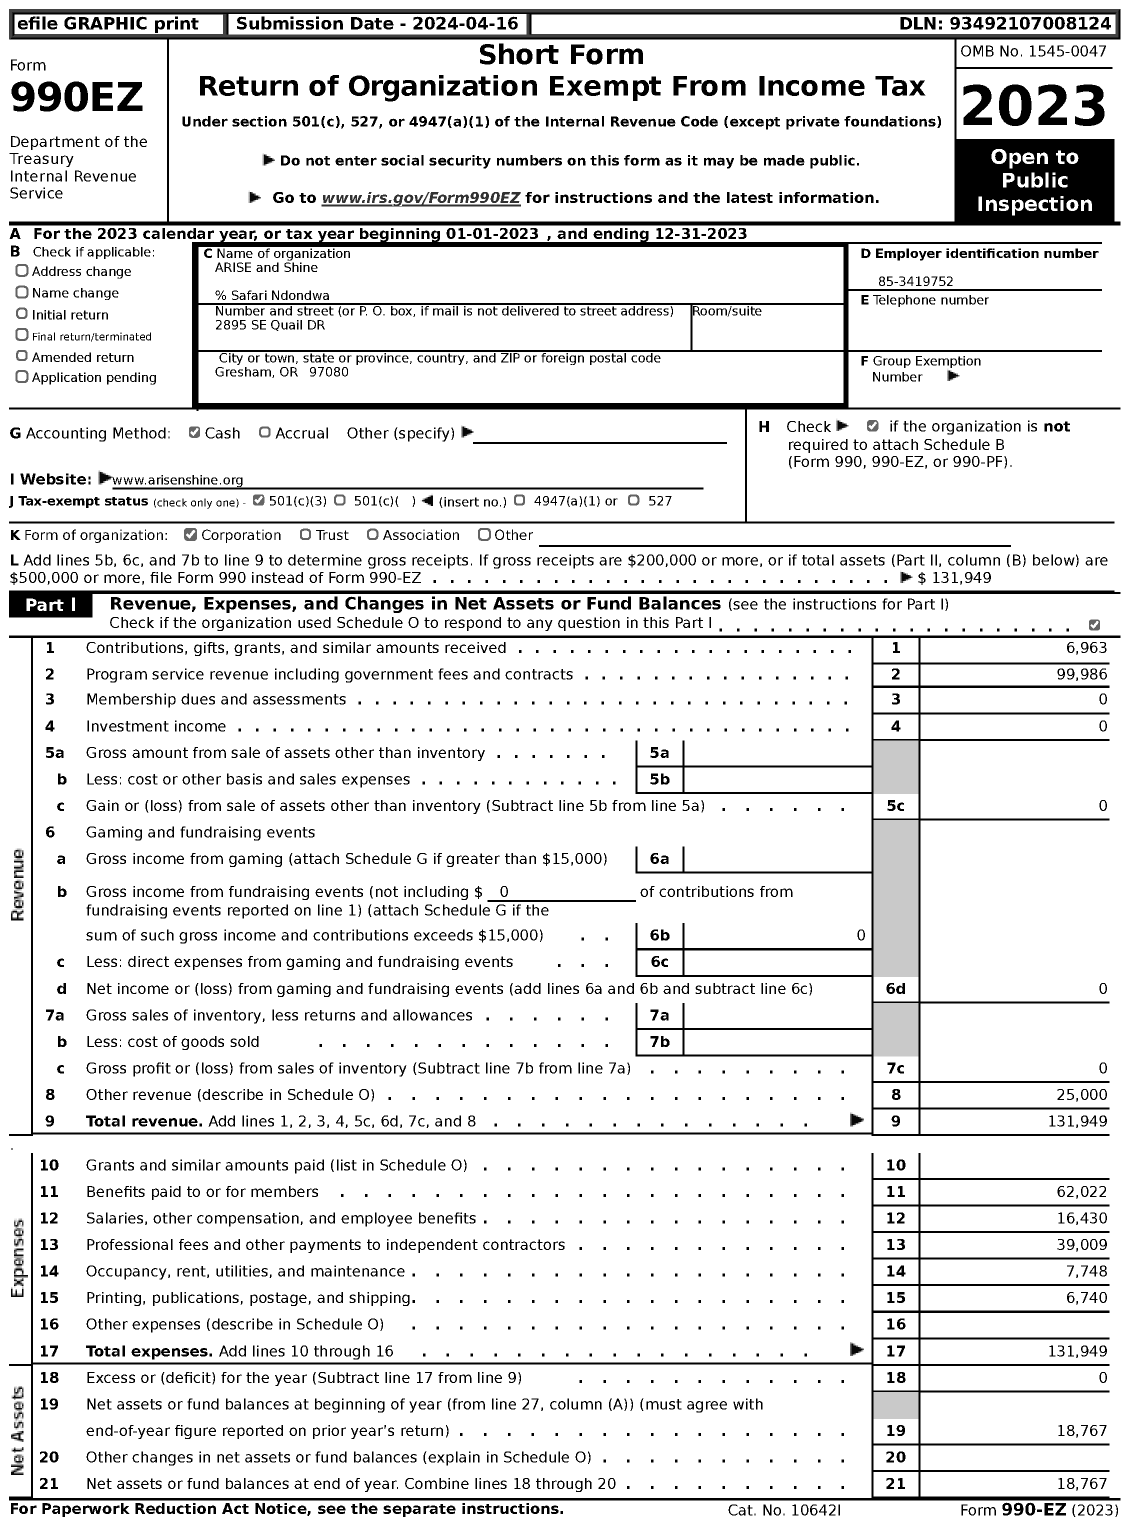 Image of first page of 2023 Form 990EZ for ARISE and Shine